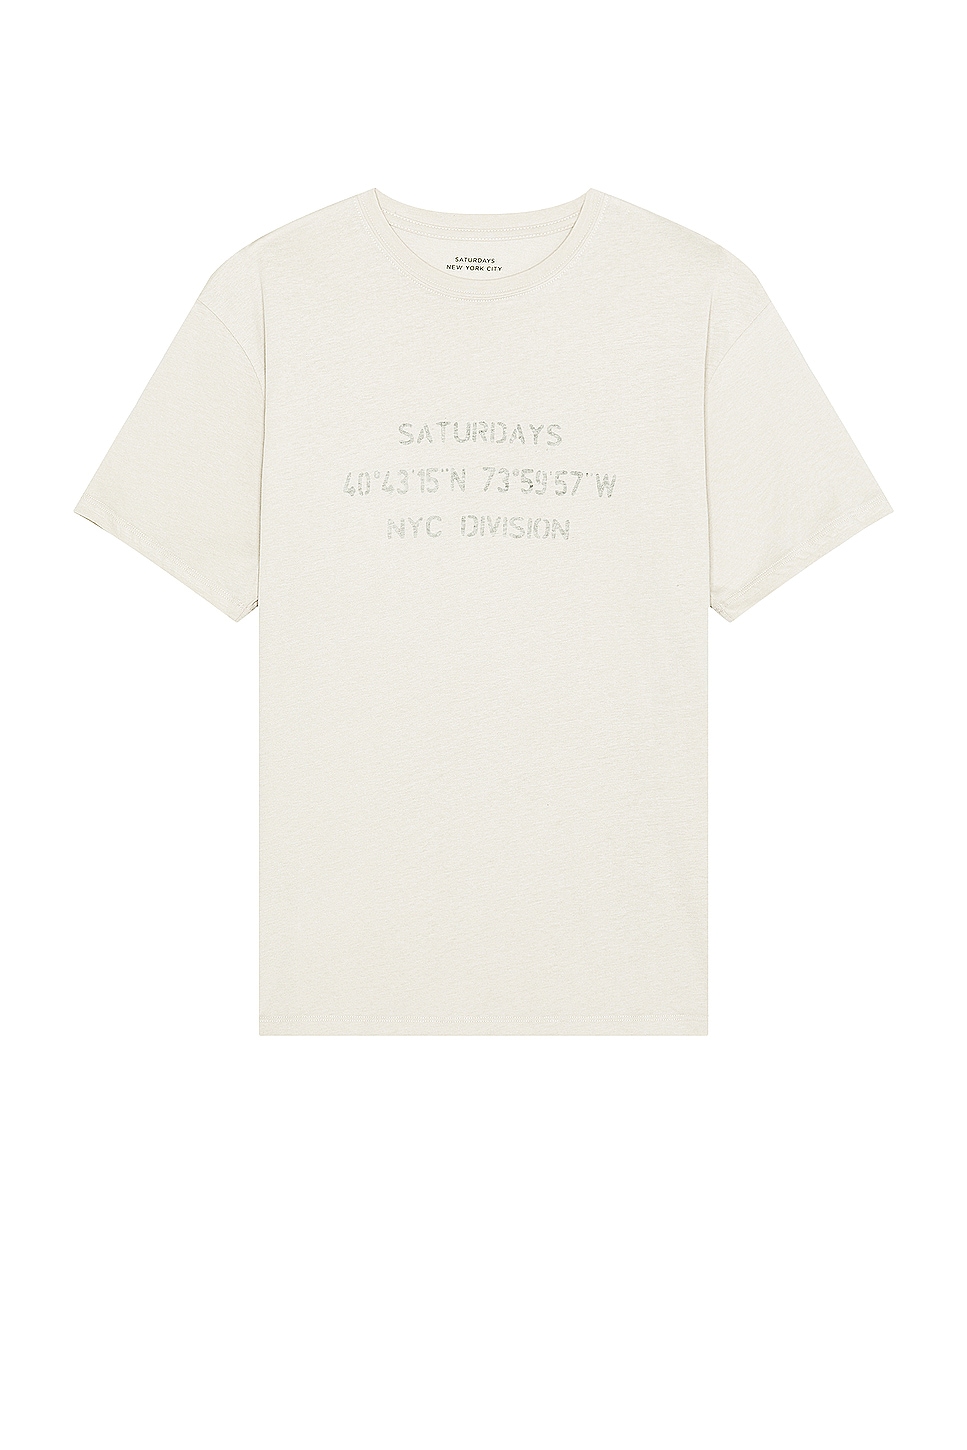 Image 1 of SATURDAYS NYC Reverse Nyc Division Standard Short Sleeve Tee in Pumice Stone